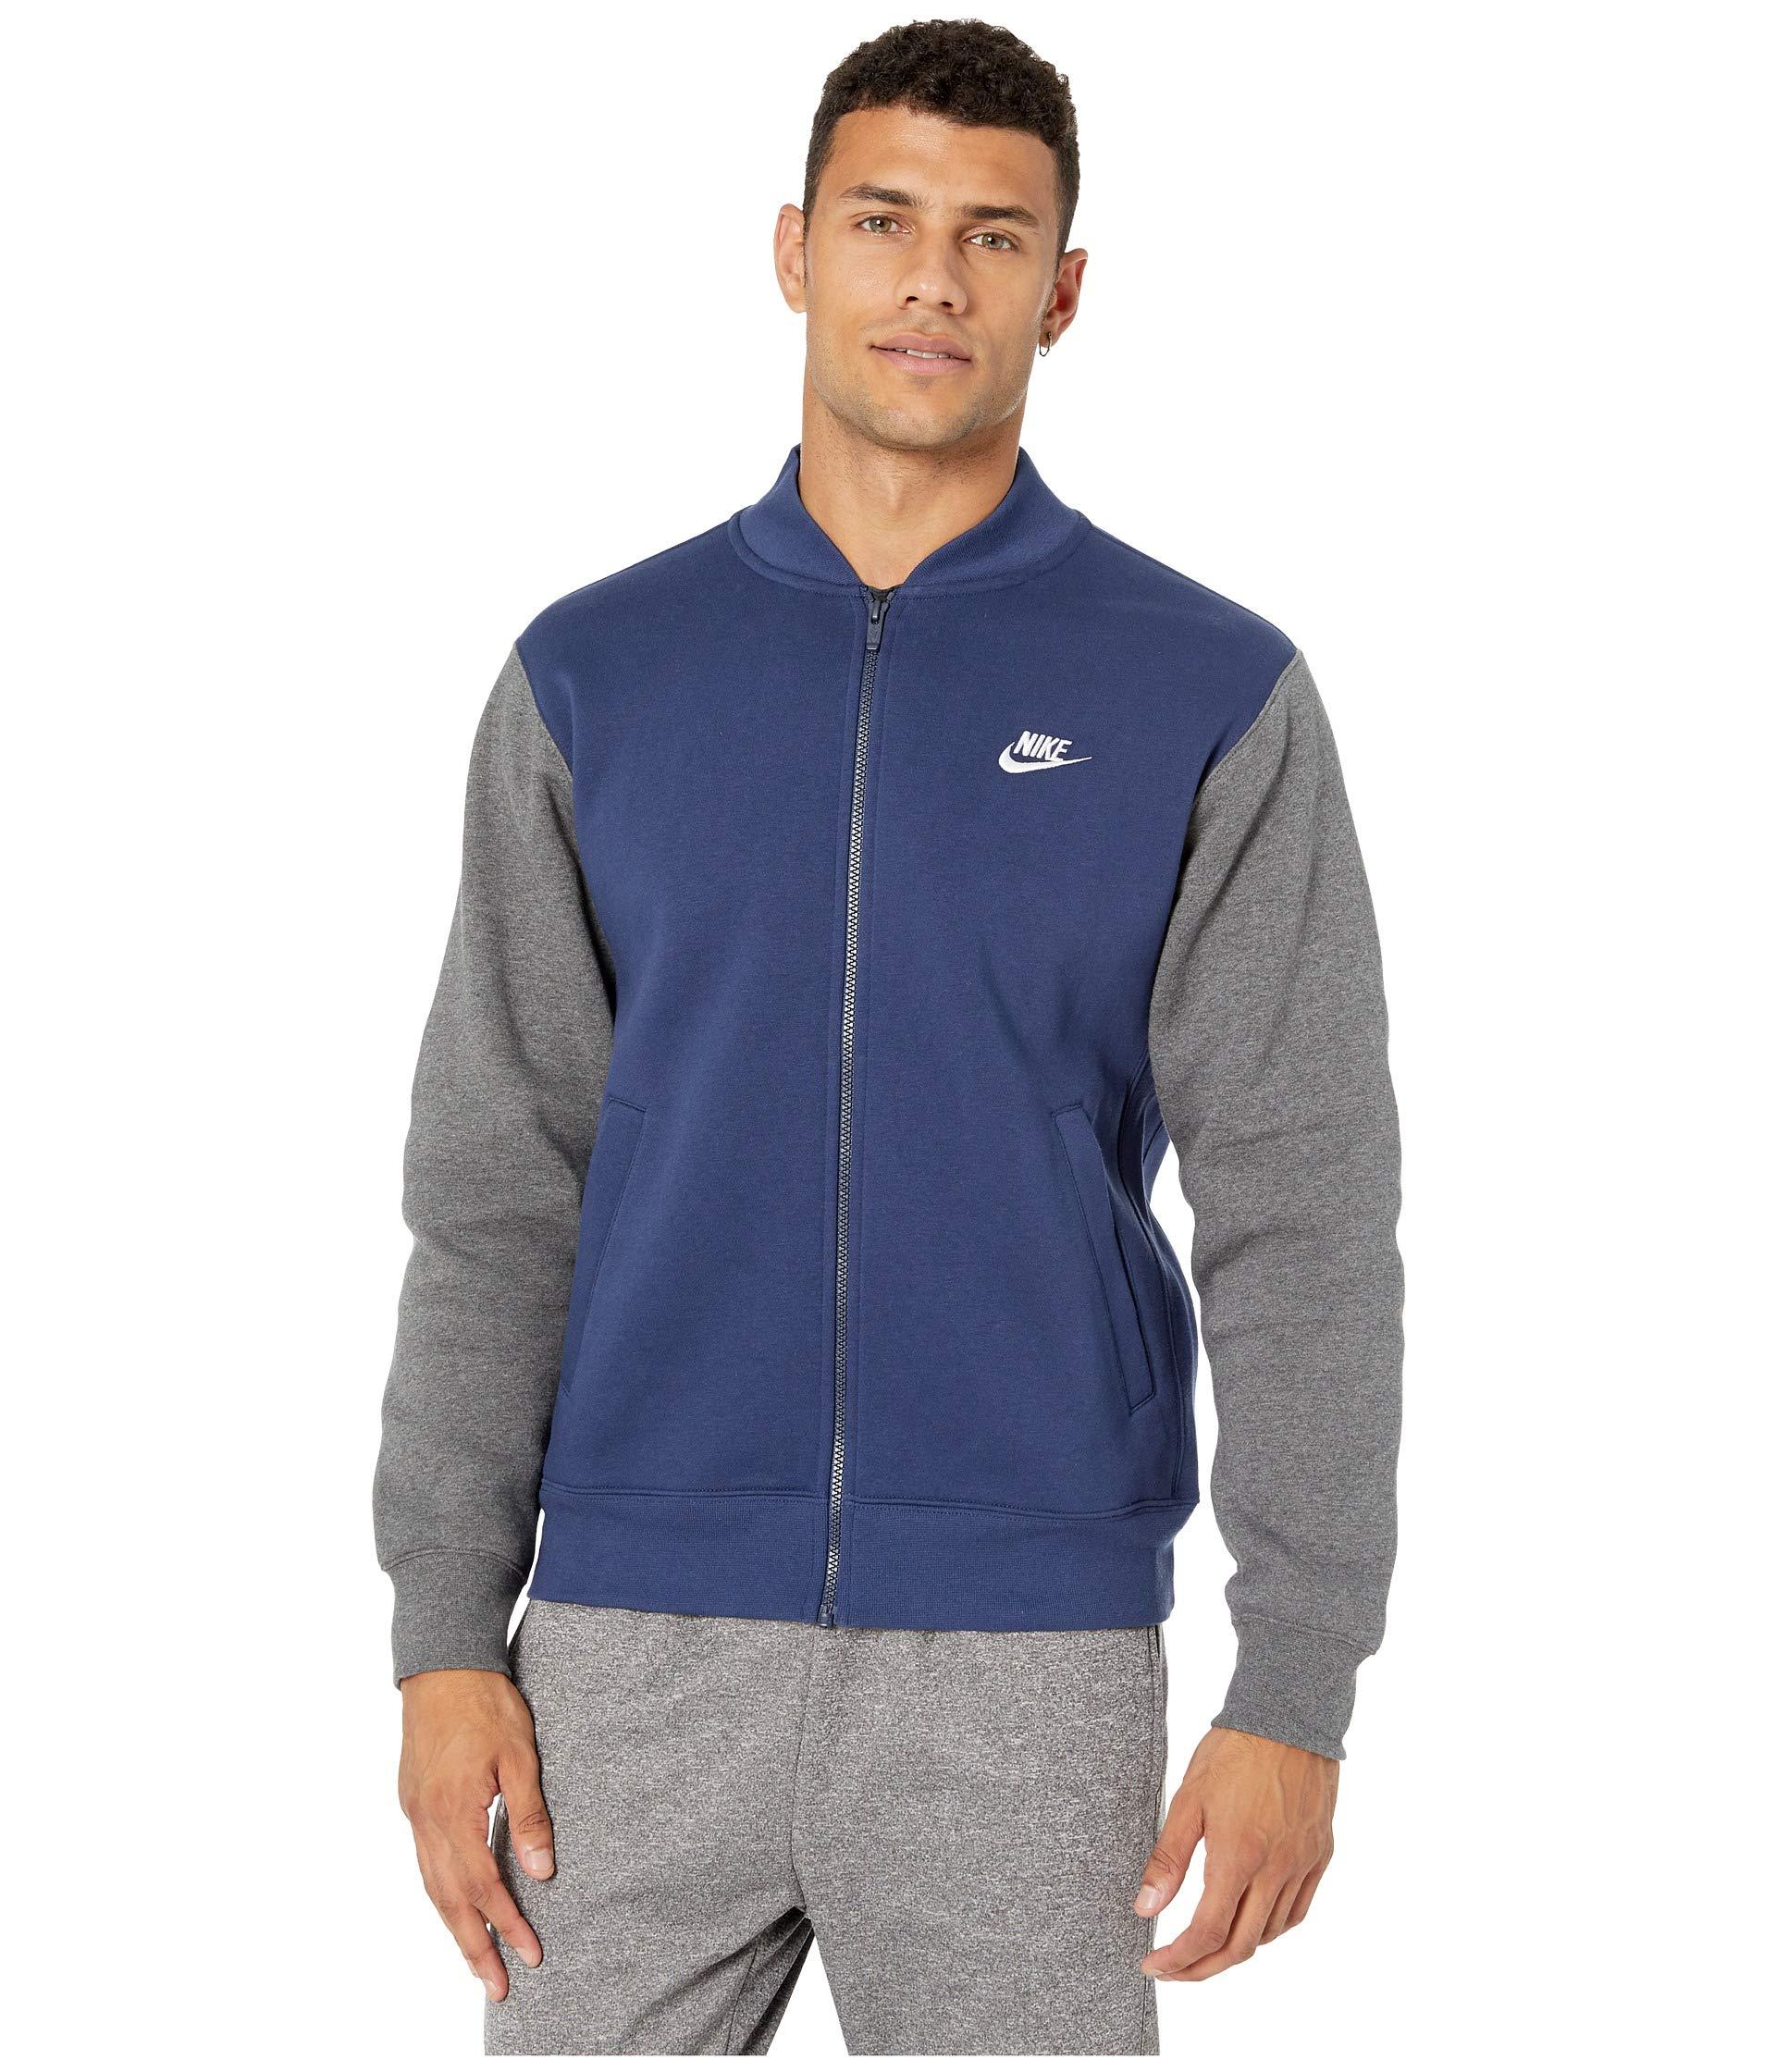 Nike Cotton Nsw Club Bomber Jacket in Navy (Blue) for Men - Lyst